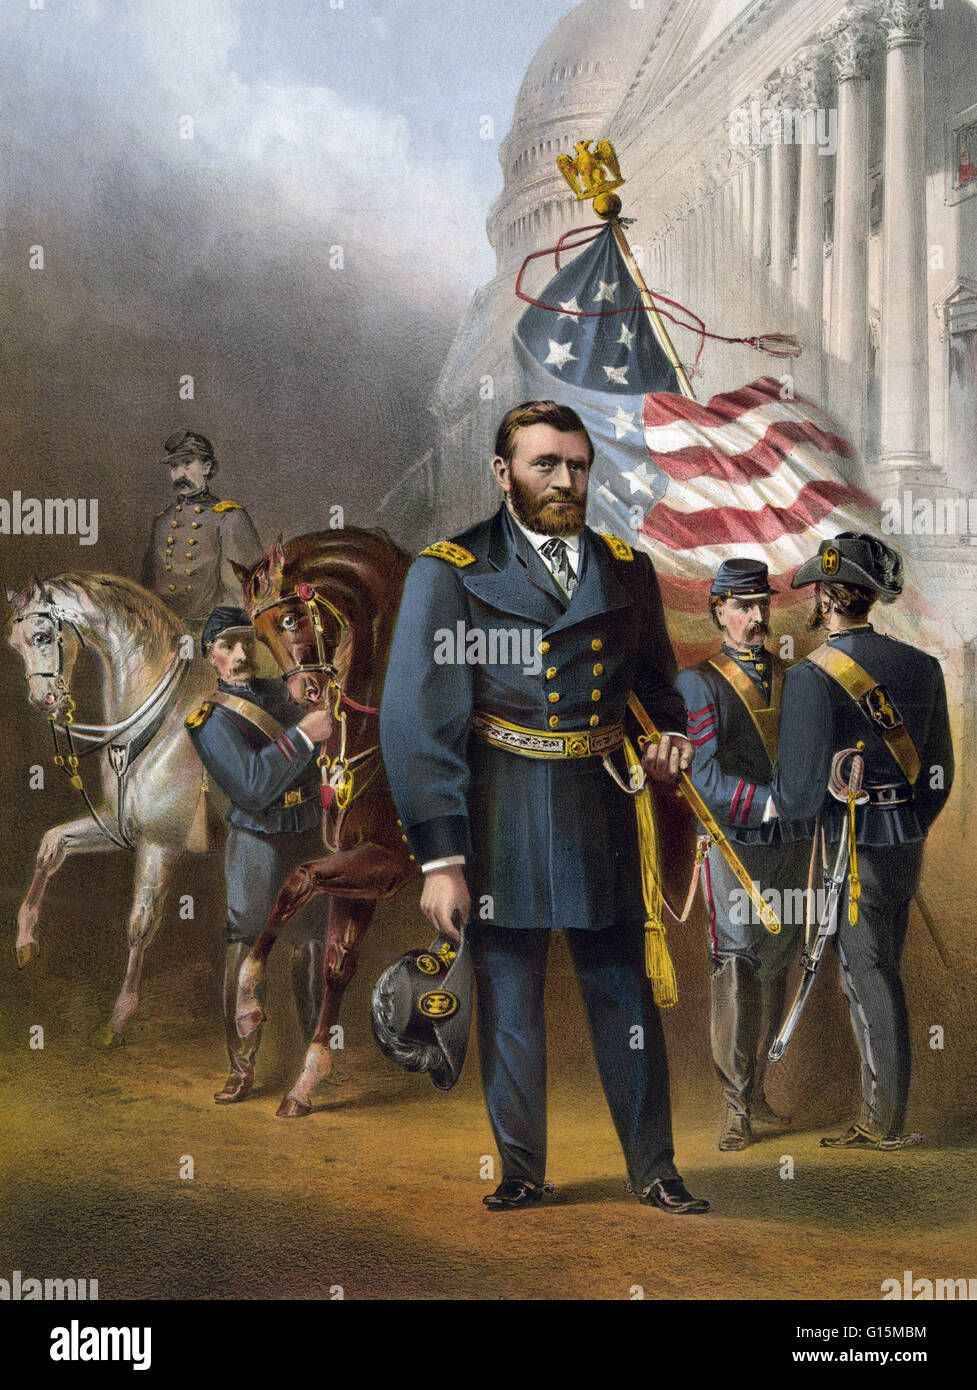 Lithograph shows Grant standing in front of other soldiers and horses at the US Capitol. Ulysses S. Grant (born Hiram Ulysses Grant; April 27, 1822 - July 23, 1885) was the 18th President of the United States. A career soldier, he graduated from the Unite Stock Photo